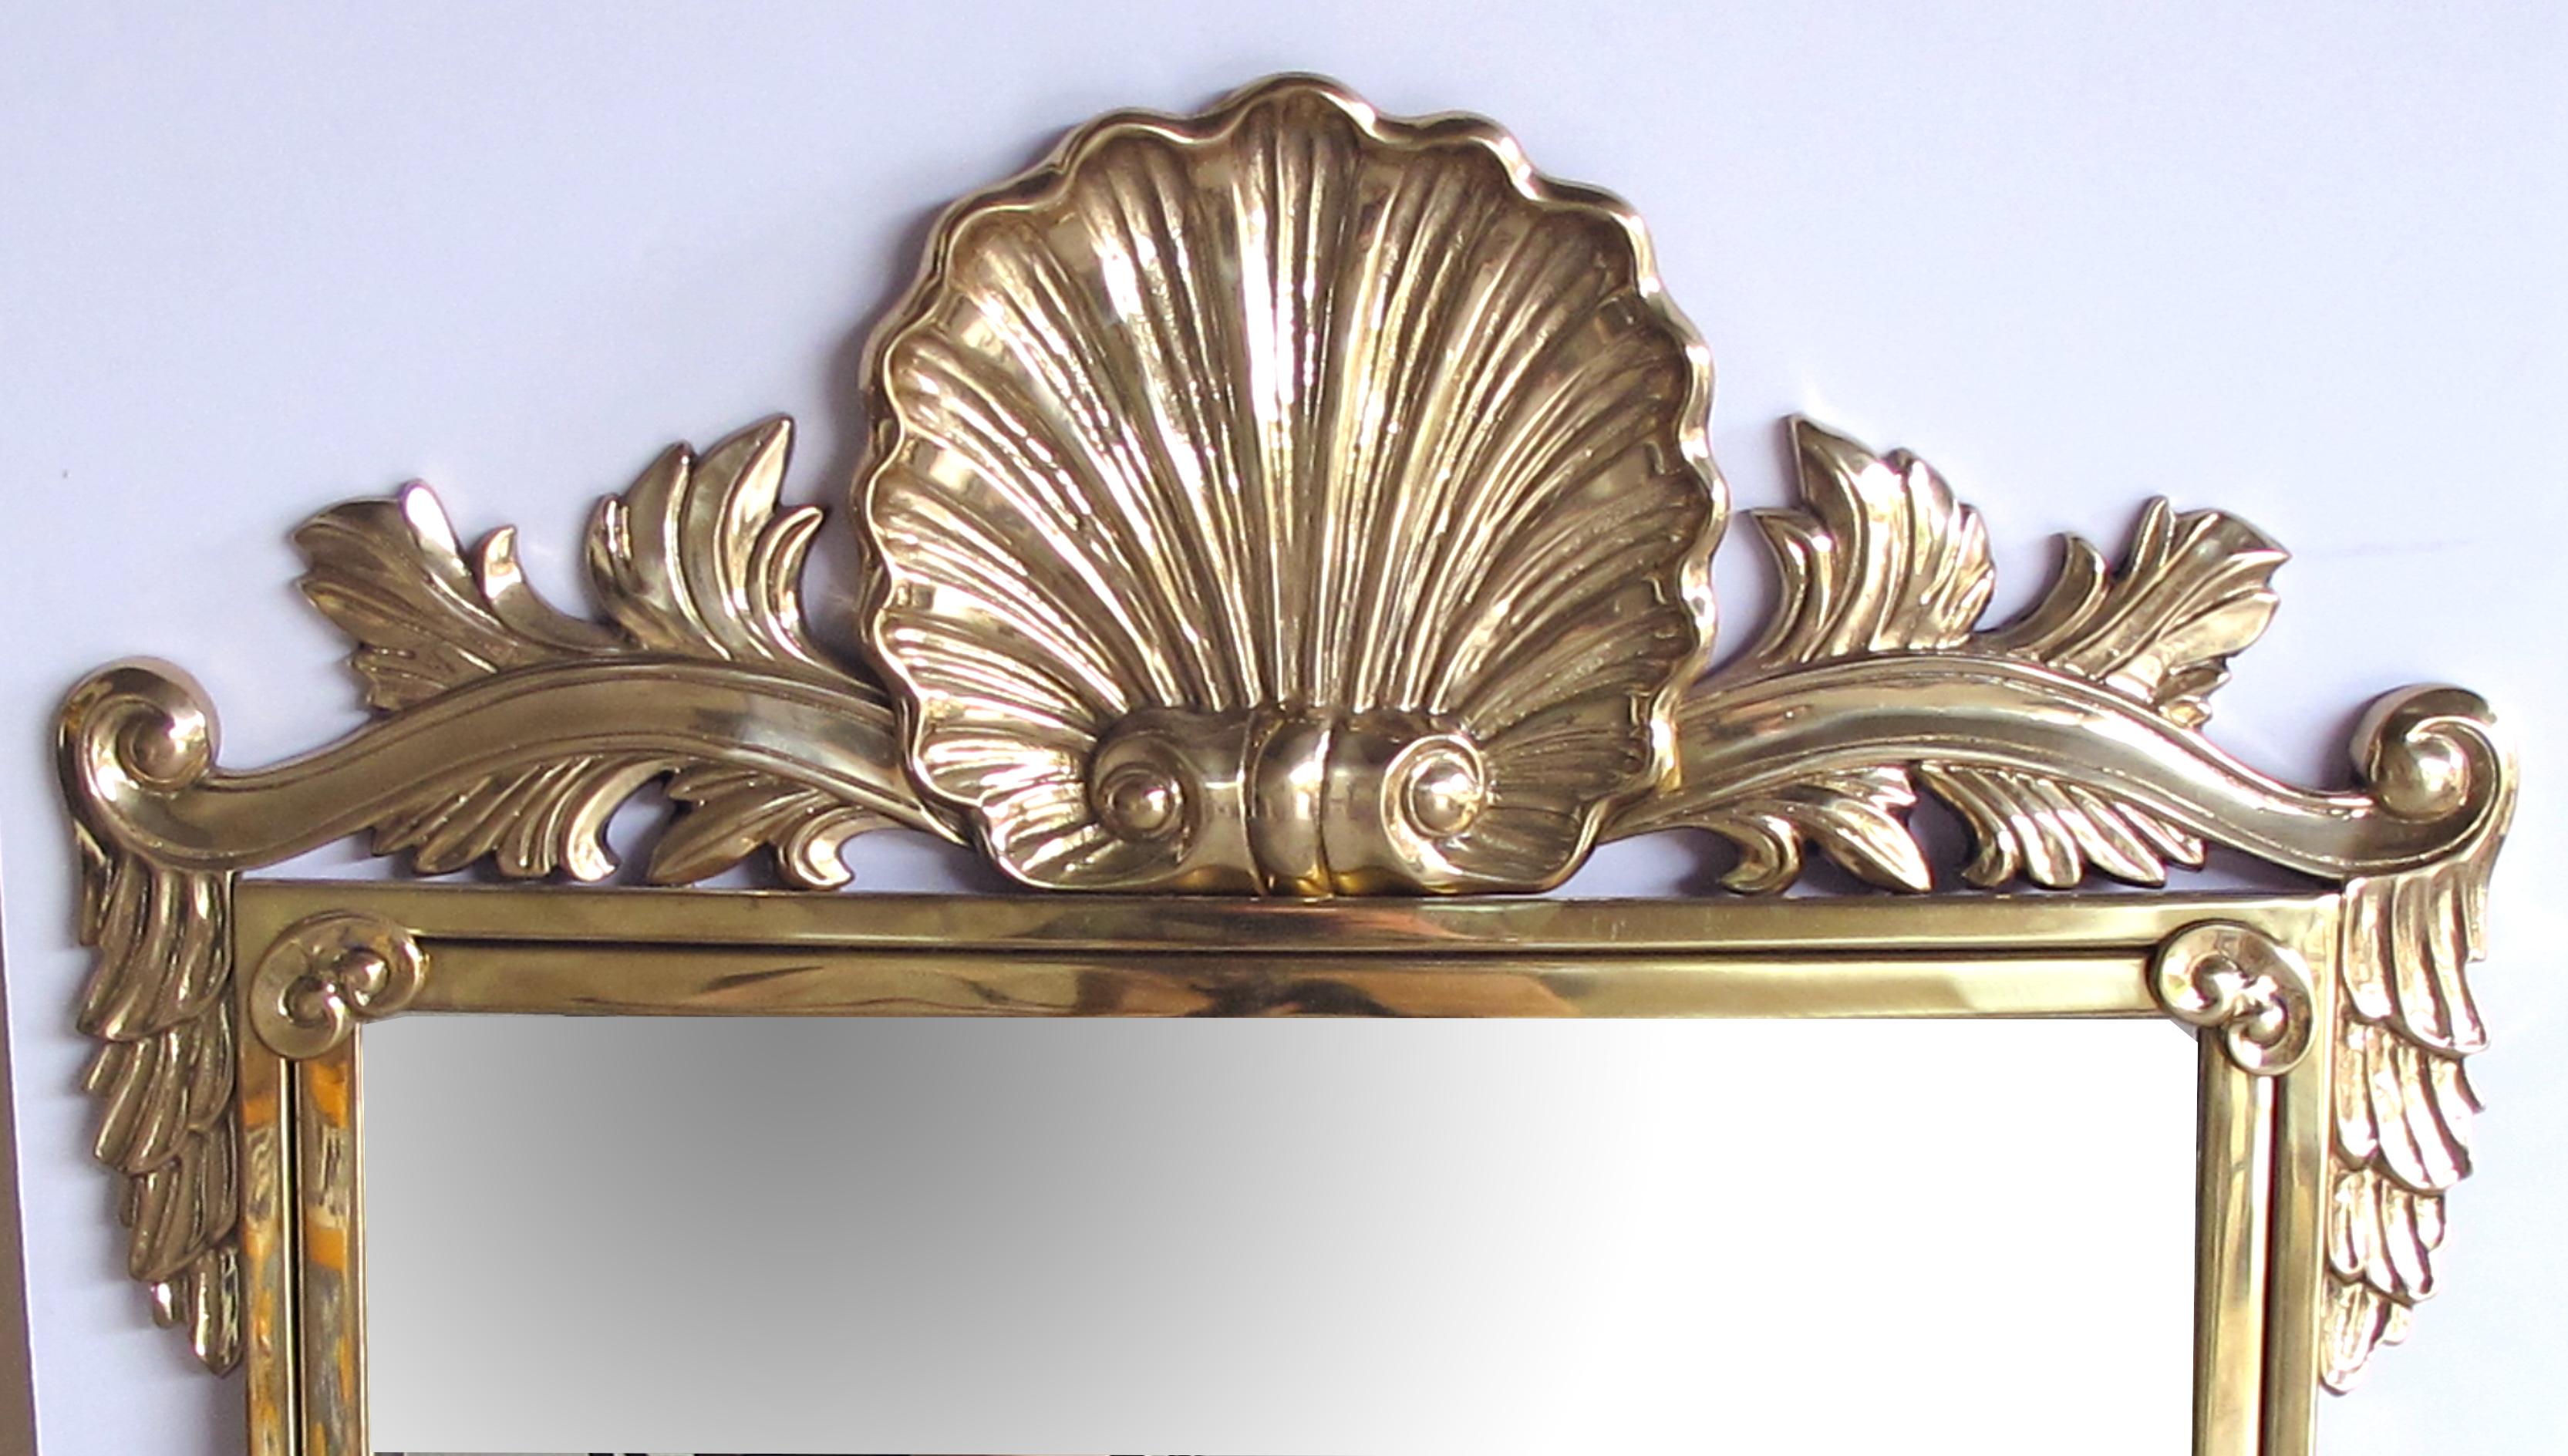 in the neoclassical taste, the boldly-scaled solid brass crest centering a robust shell motif flanked by lively scrolls and foliate decoration all surrounding a beveled mirror plate